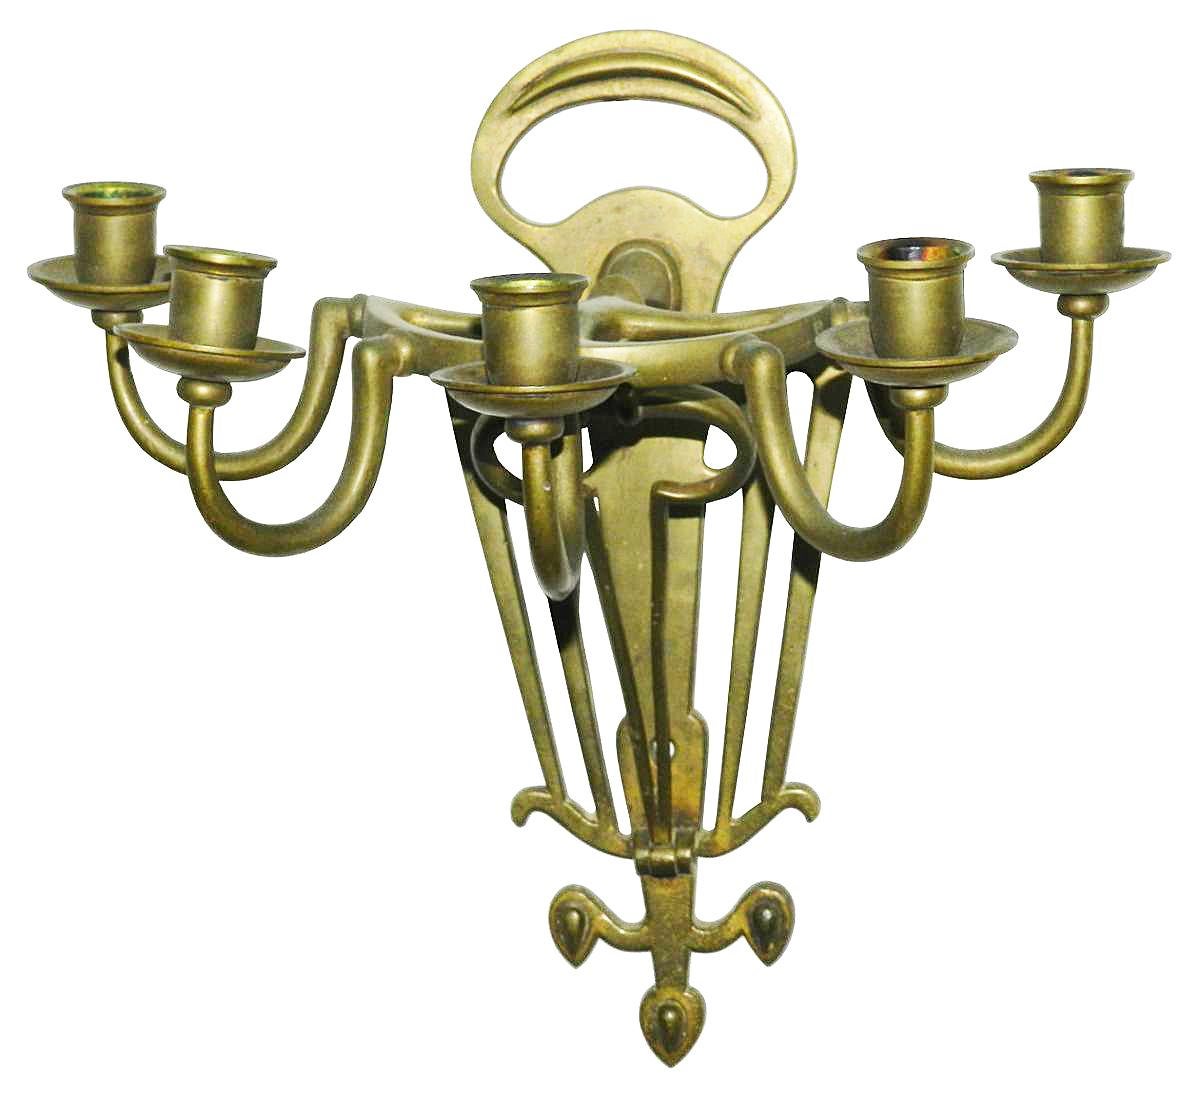 Rare pair of Jugenstil sconces in bronze, circa 1900.
End of 19th century beginning of 20th century, created for a candle lighting.
 